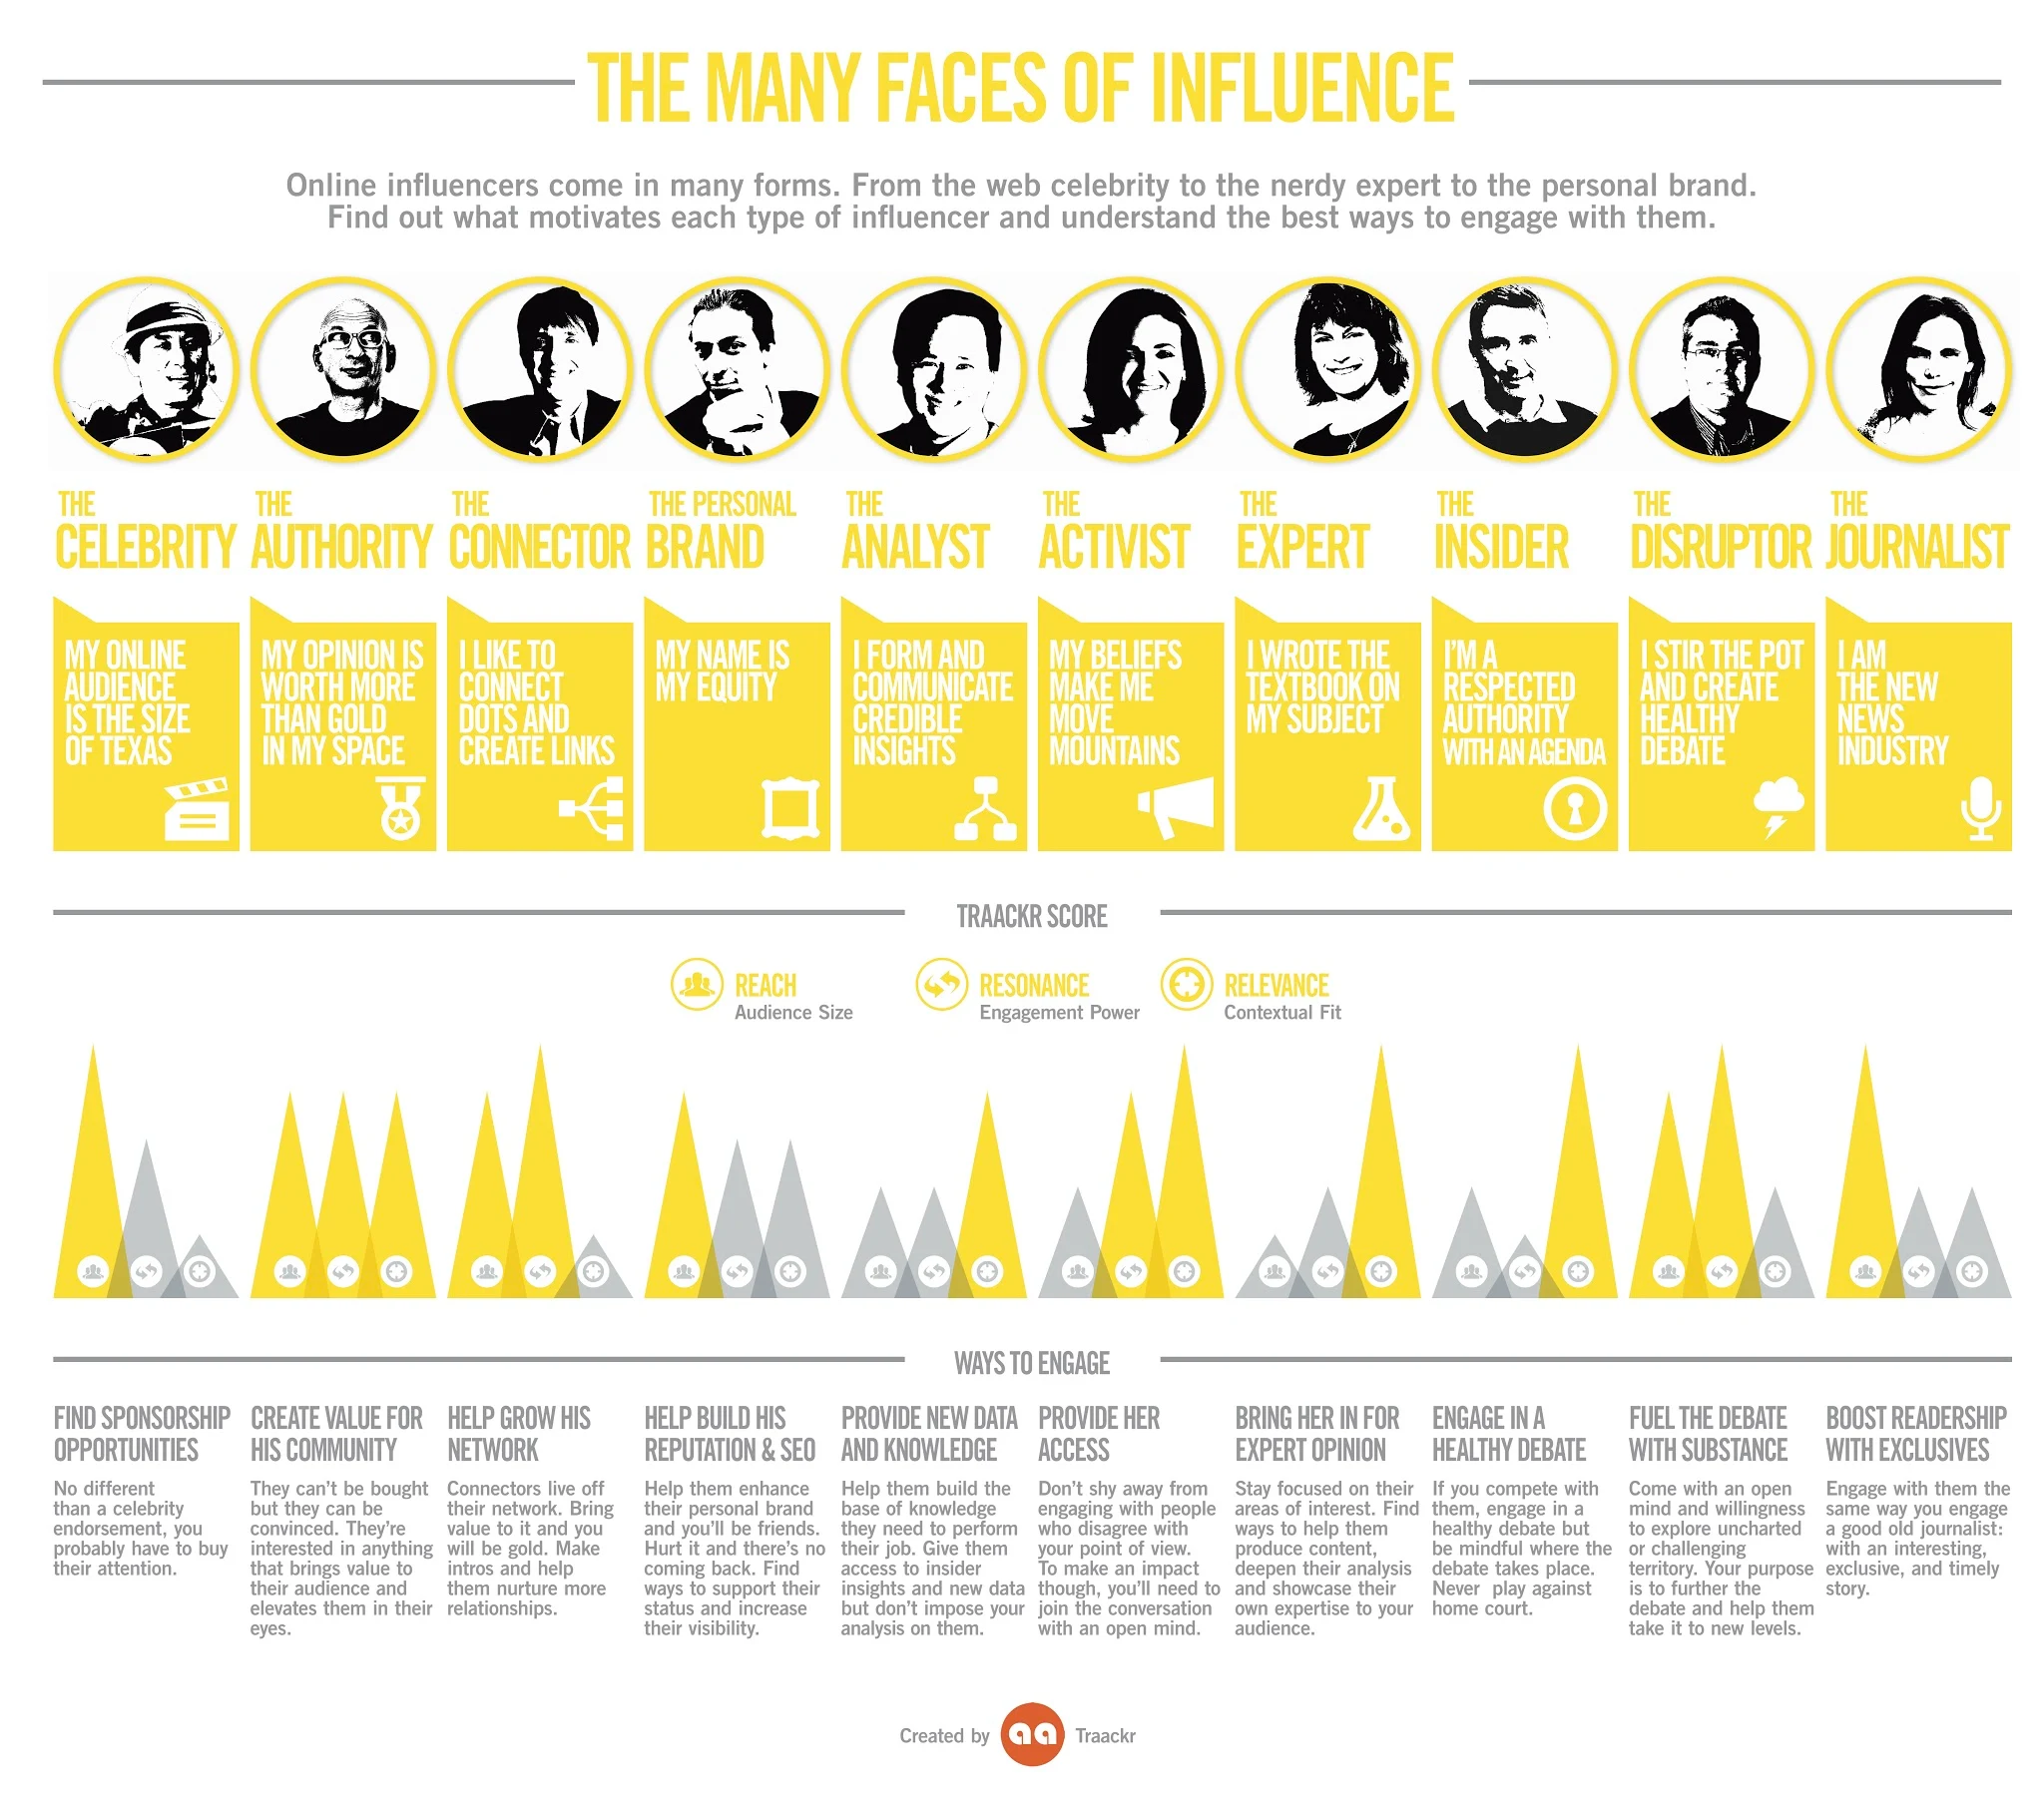 The Many Faces of Influence - Top 10 Online Influencers - Best Ways To Engage Them [INFOGRAPHIC]